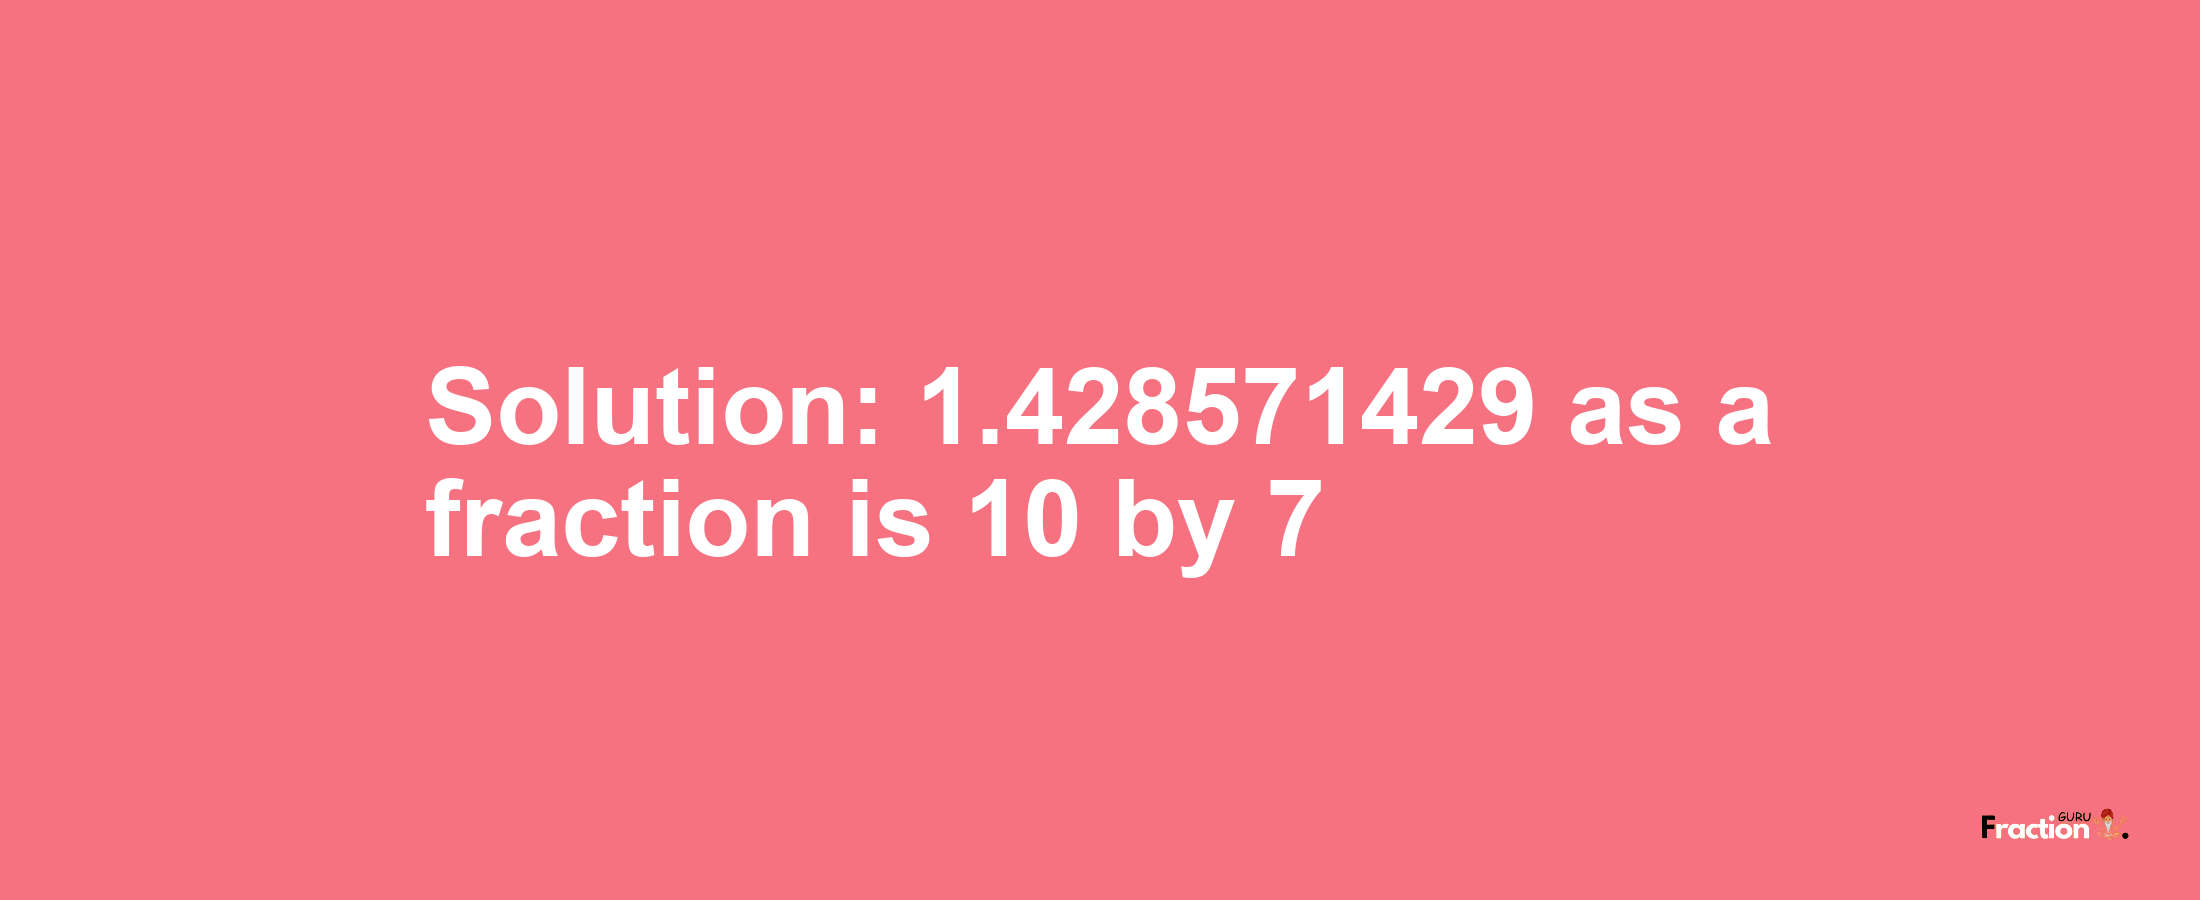 Solution:1.428571429 as a fraction is 10/7